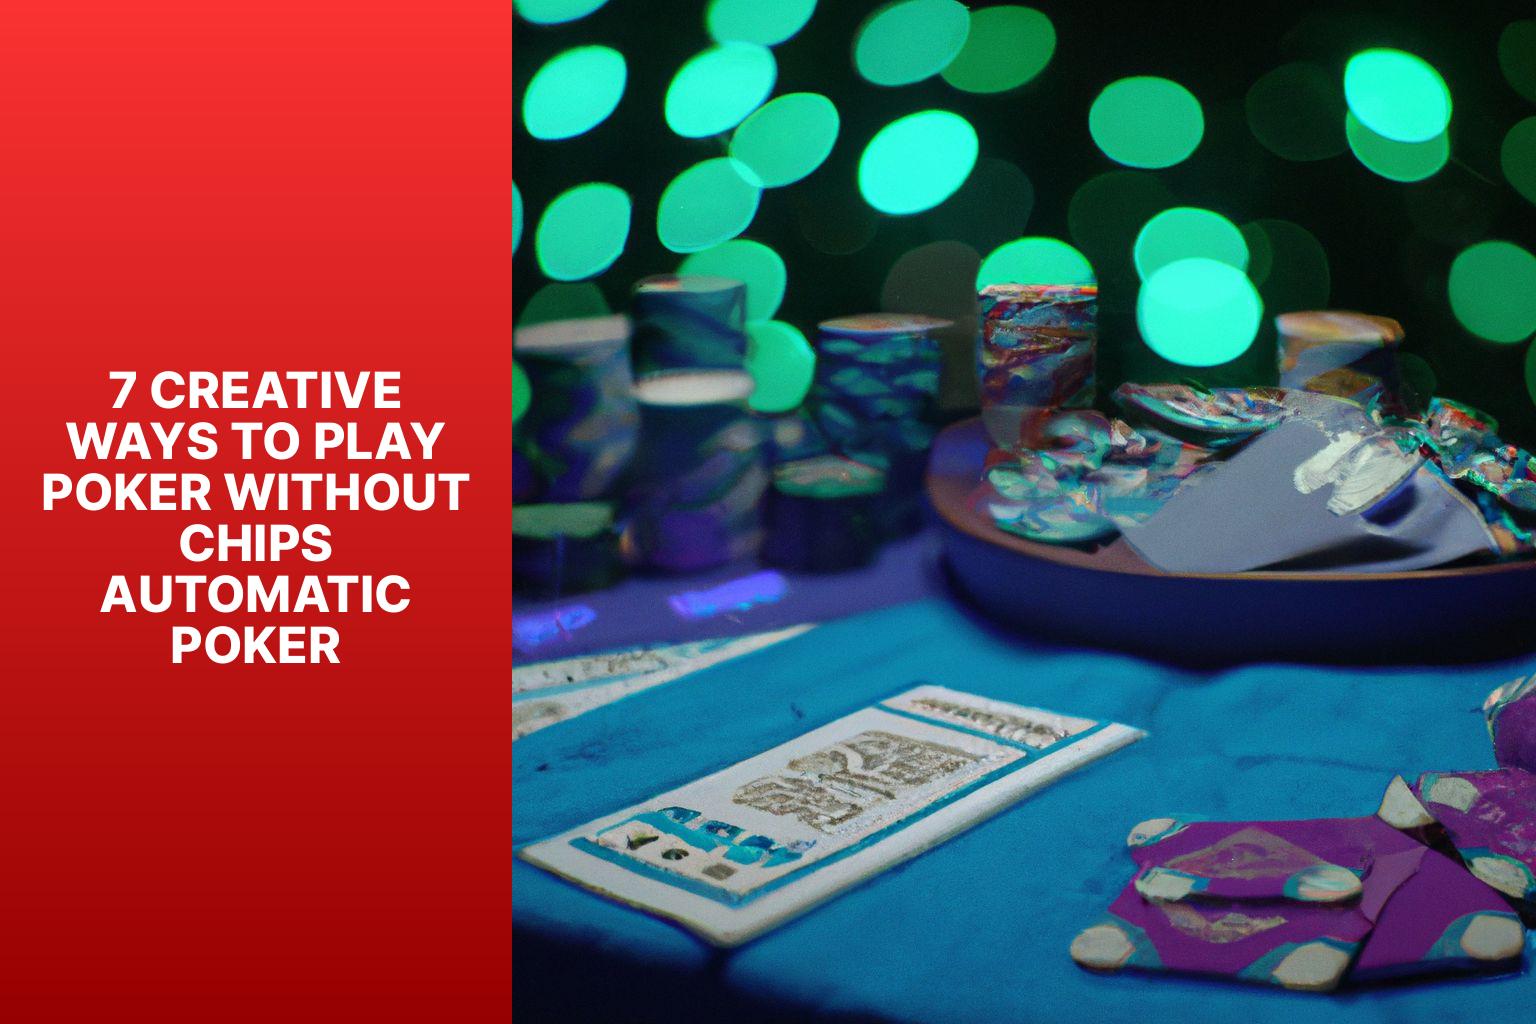 7 Creative Ways to Play Poker Without Chips Automatic Poker